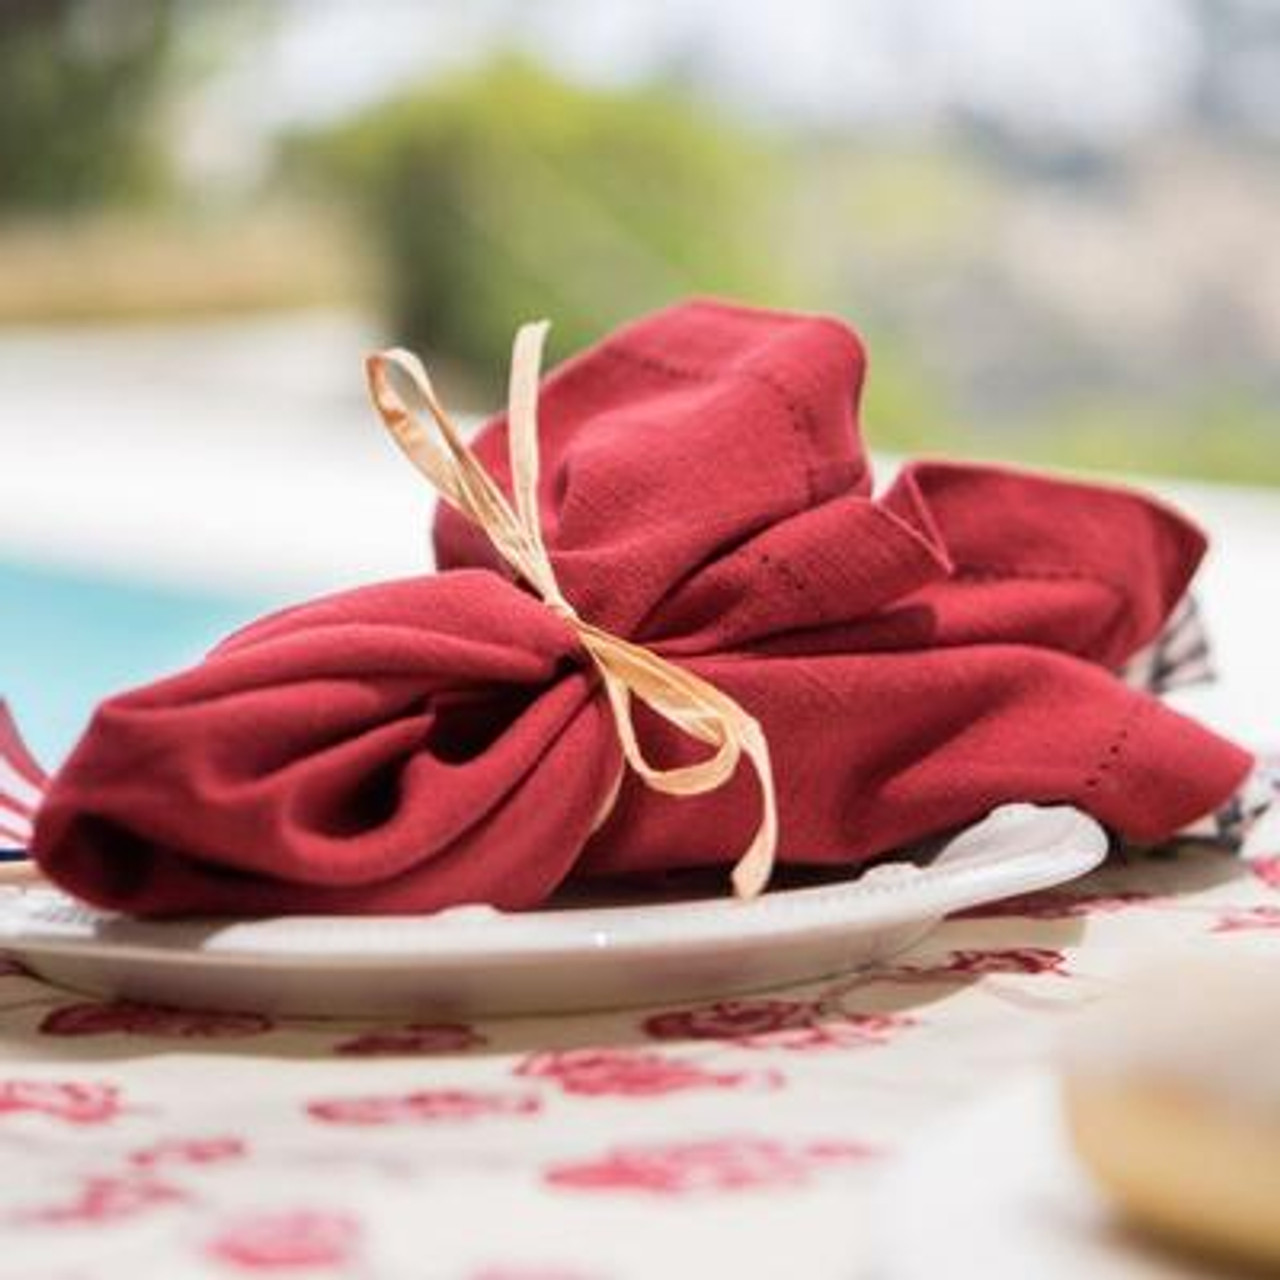 All Cotton and Linen Cloth Napkins, Red Christmas Napkins, Cotton Dinner  Napkins, Hemstitched Linen Napkins, Red Cloth Napkins, Wedding Table Napkins,  Set of 6 (18x18) 